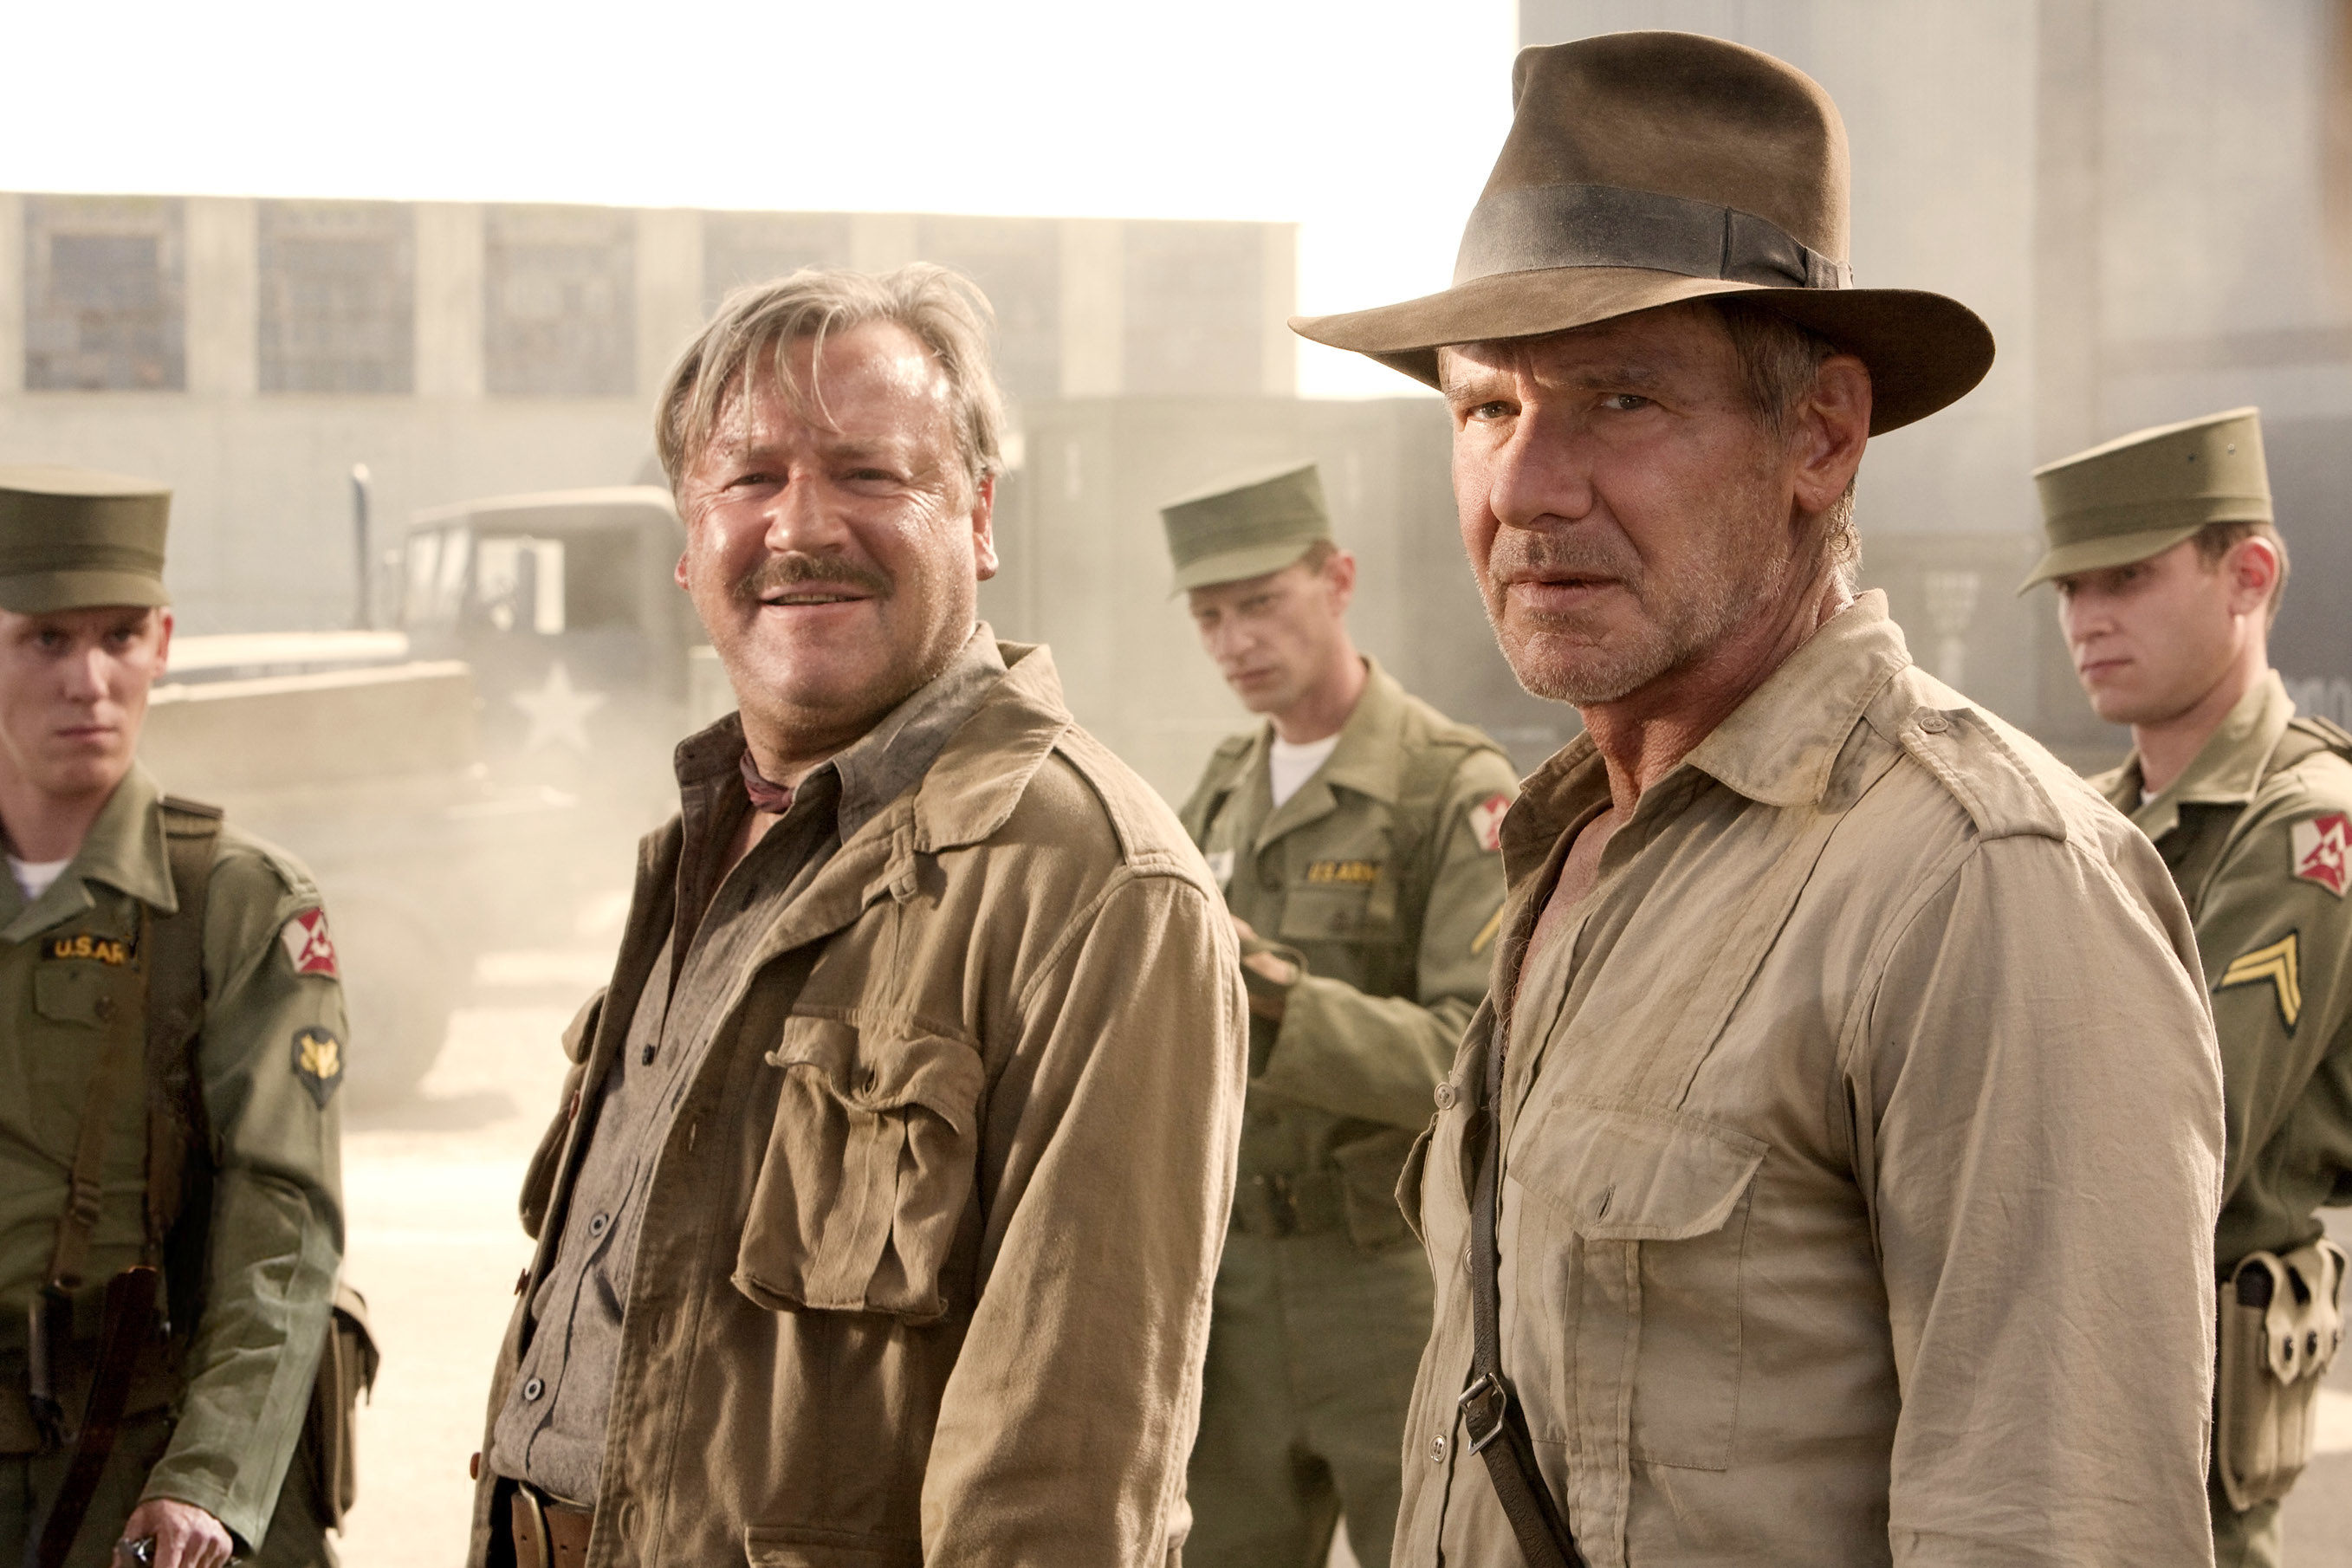 Ray Winstone and Harrison Ford in Indiana Jones and the Kingdom of the Crystal Skull